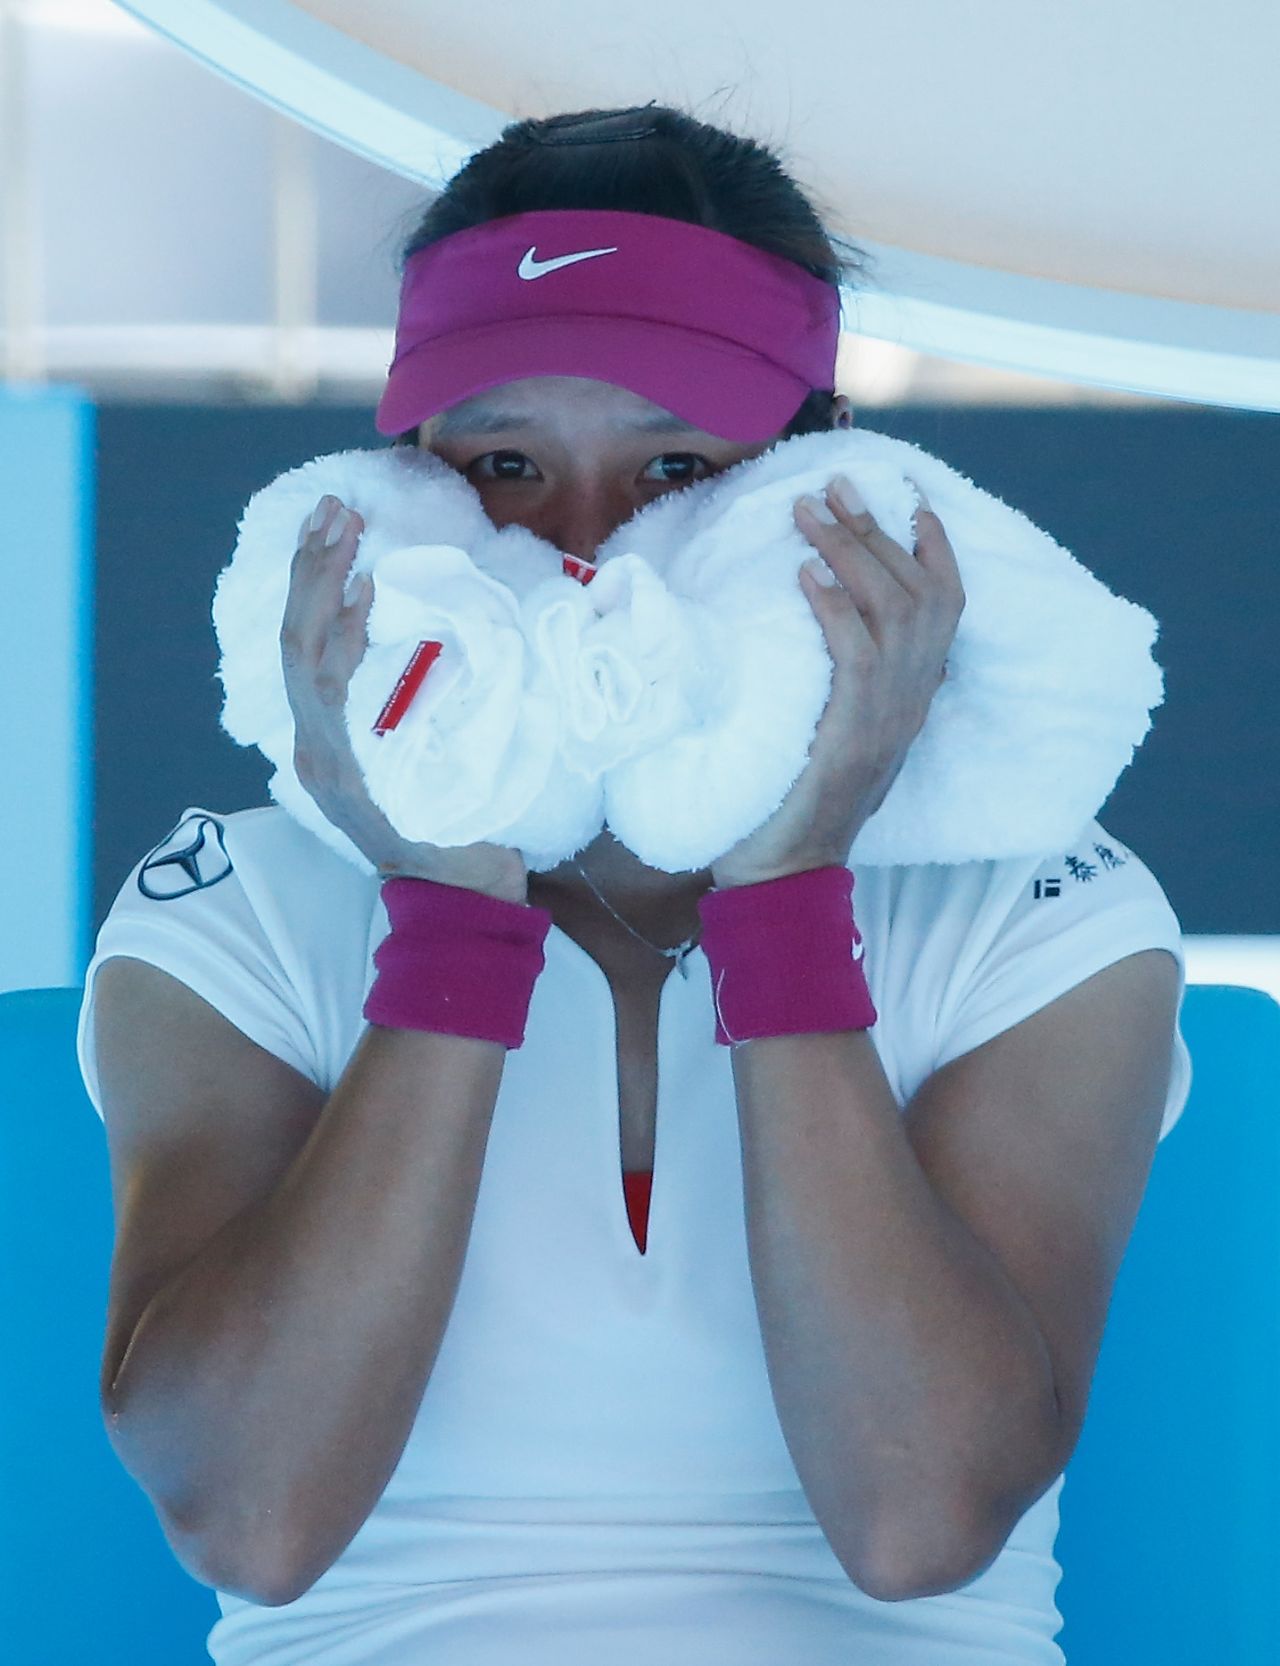 Li Na faced a battle to stay cool and to stay in the Australian Open against Lucie Safarova.